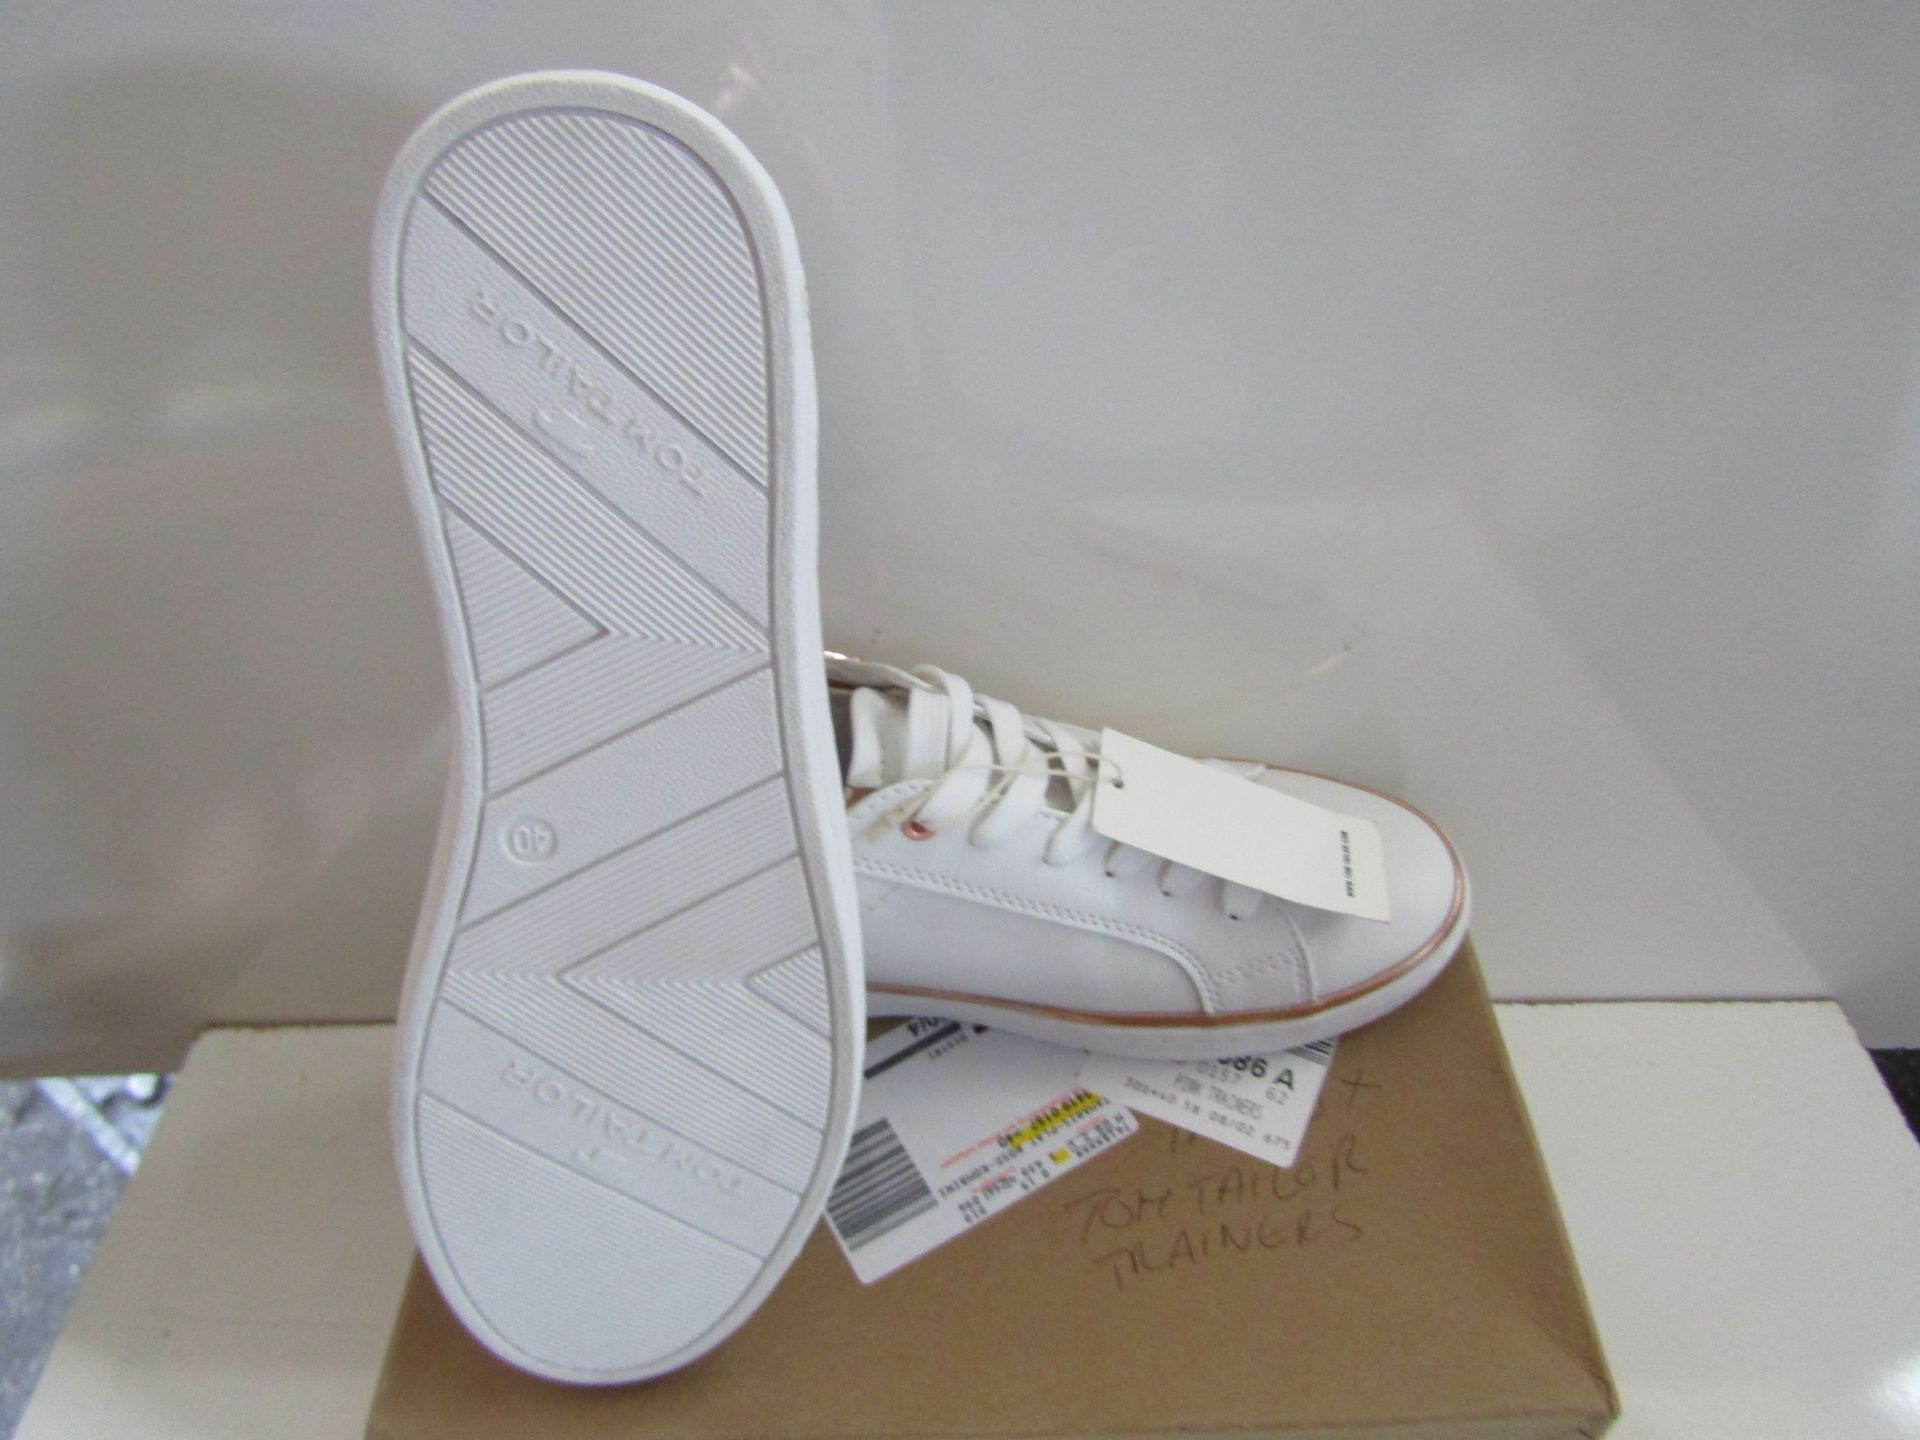 Tom Tailor White/Gold Coloured Trainers Size 40 New & Boxed - Image 2 of 3